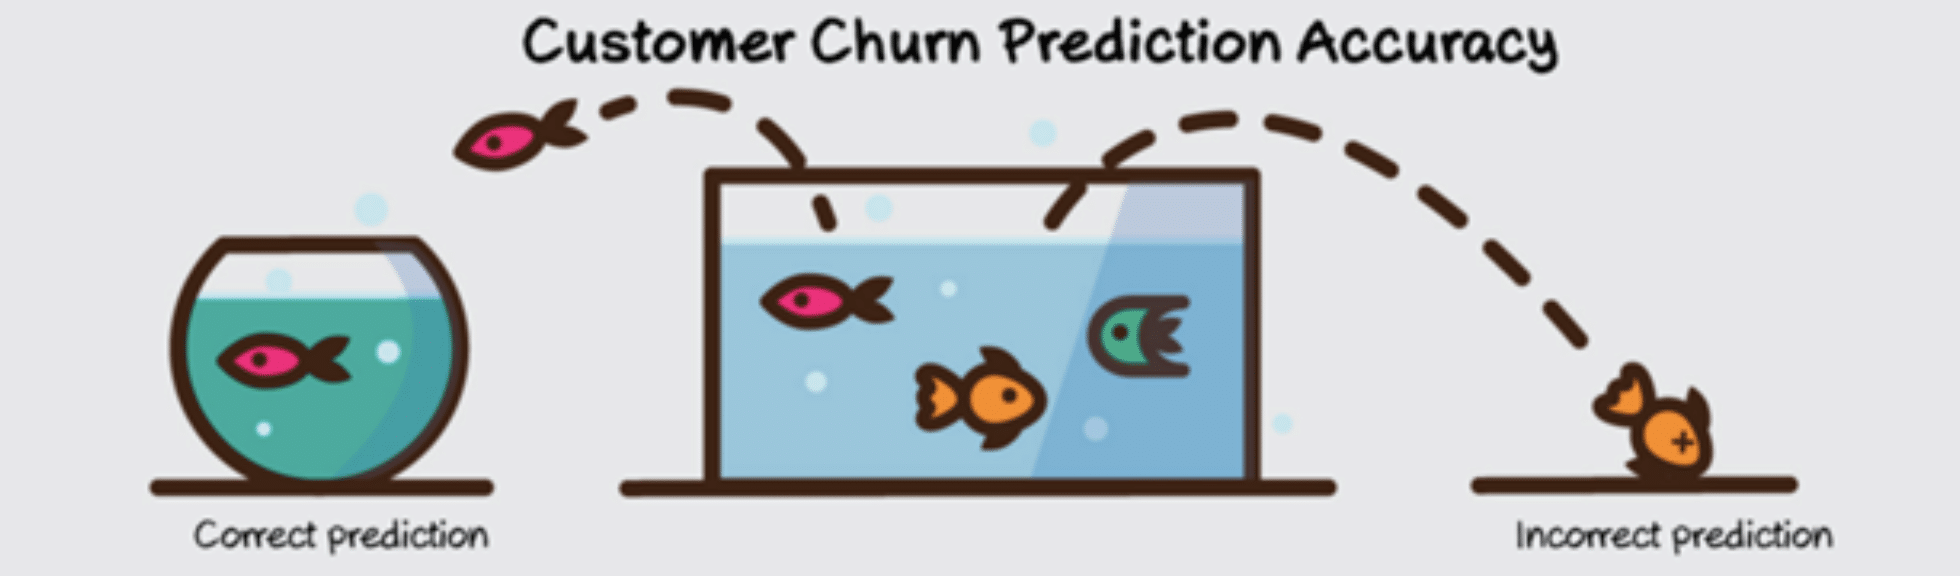 A depiction of the accuracy of churn prediction